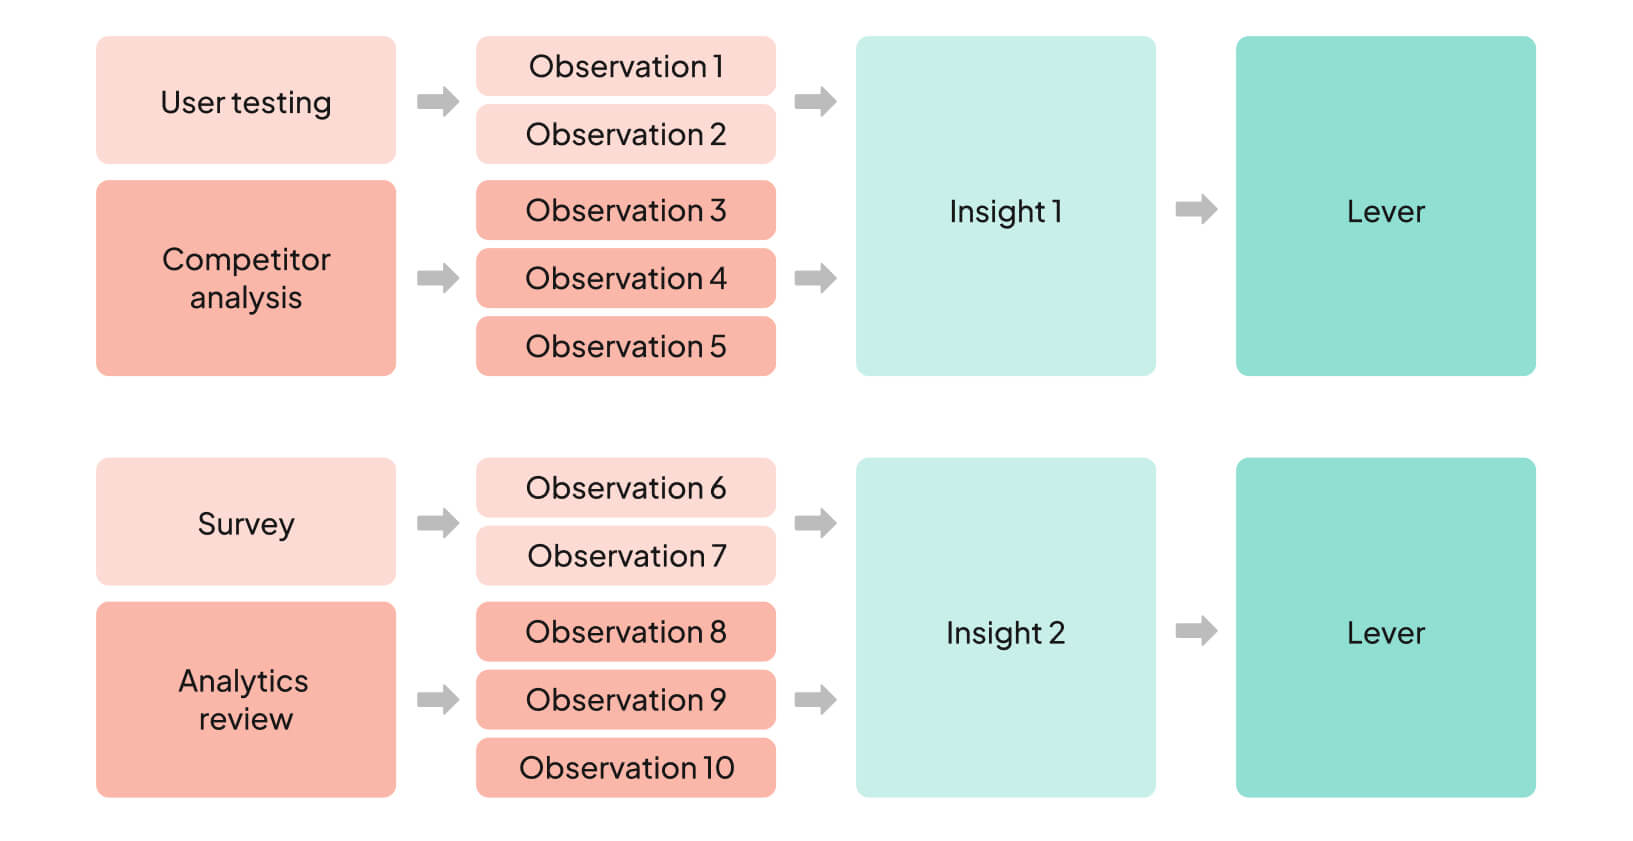 Observations to insights to levers